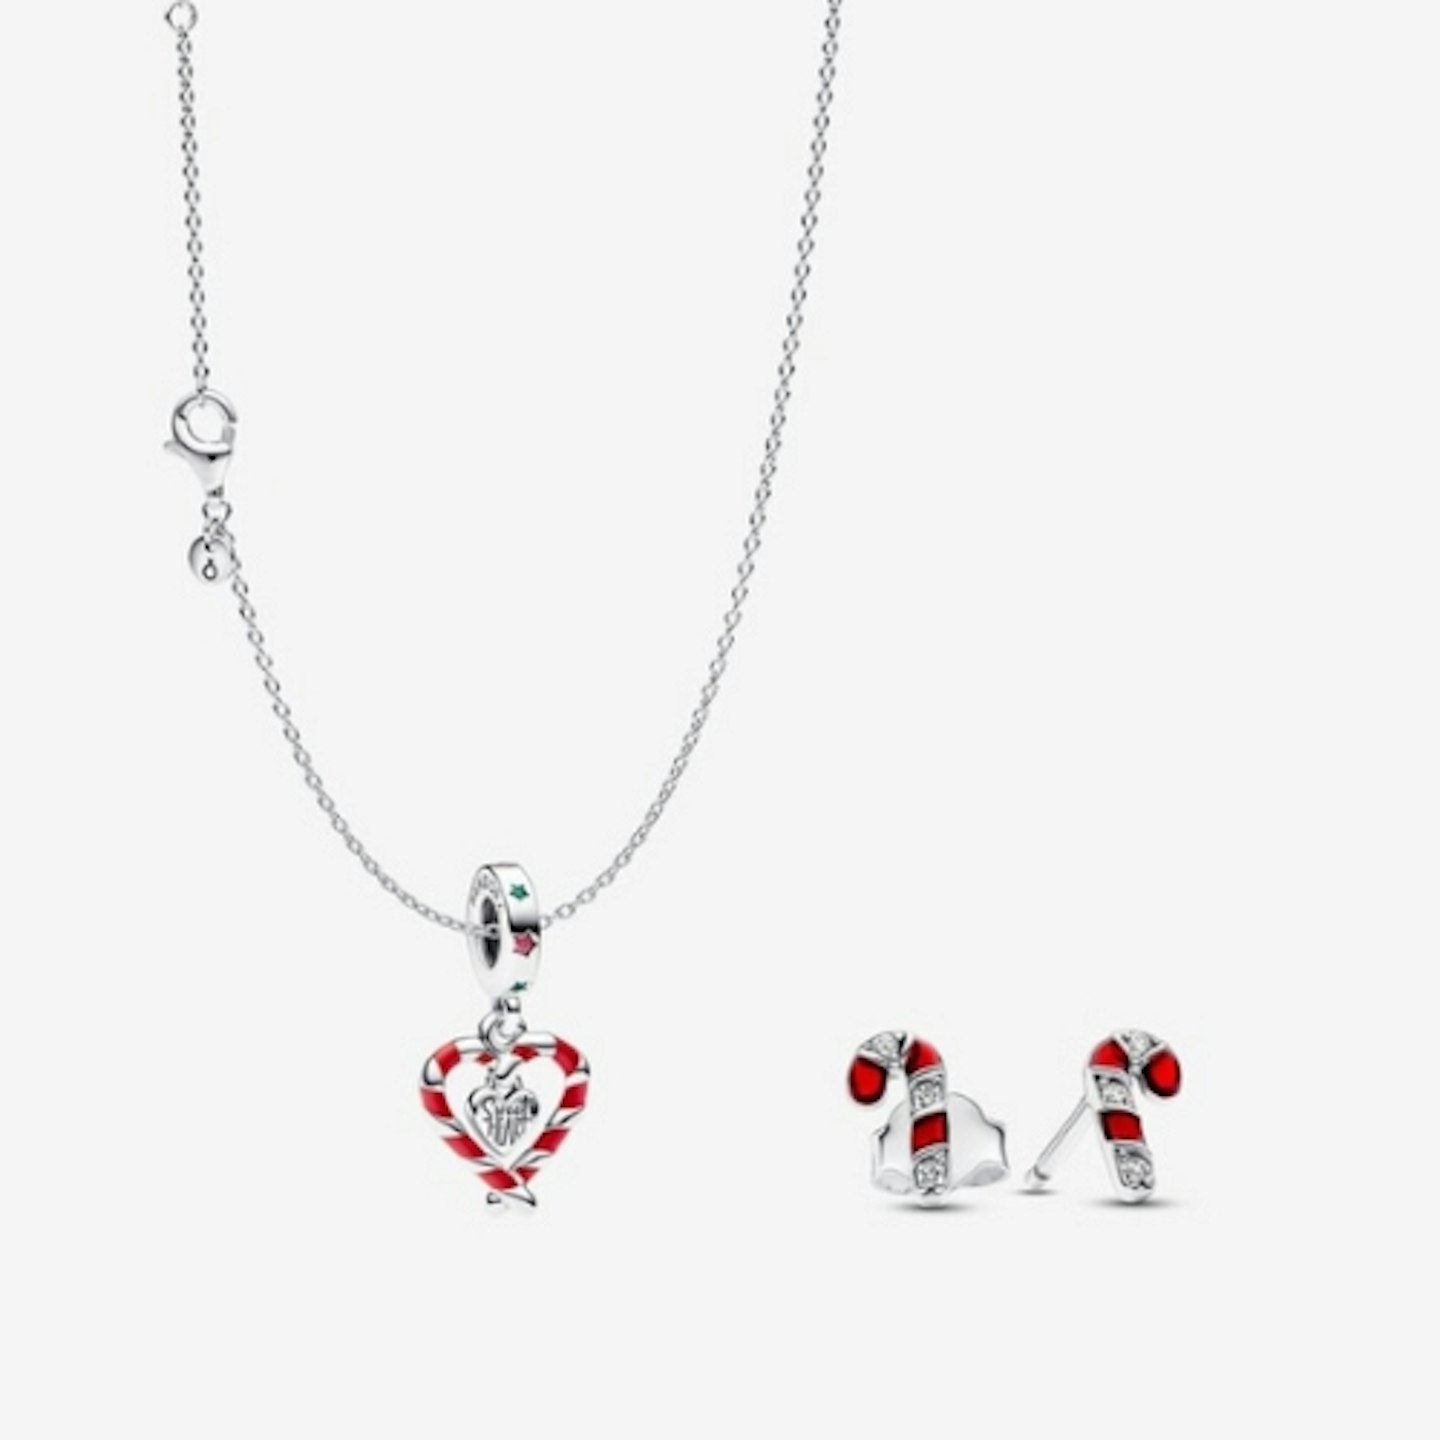 Candy Cane Necklace and Earrings Gift Set